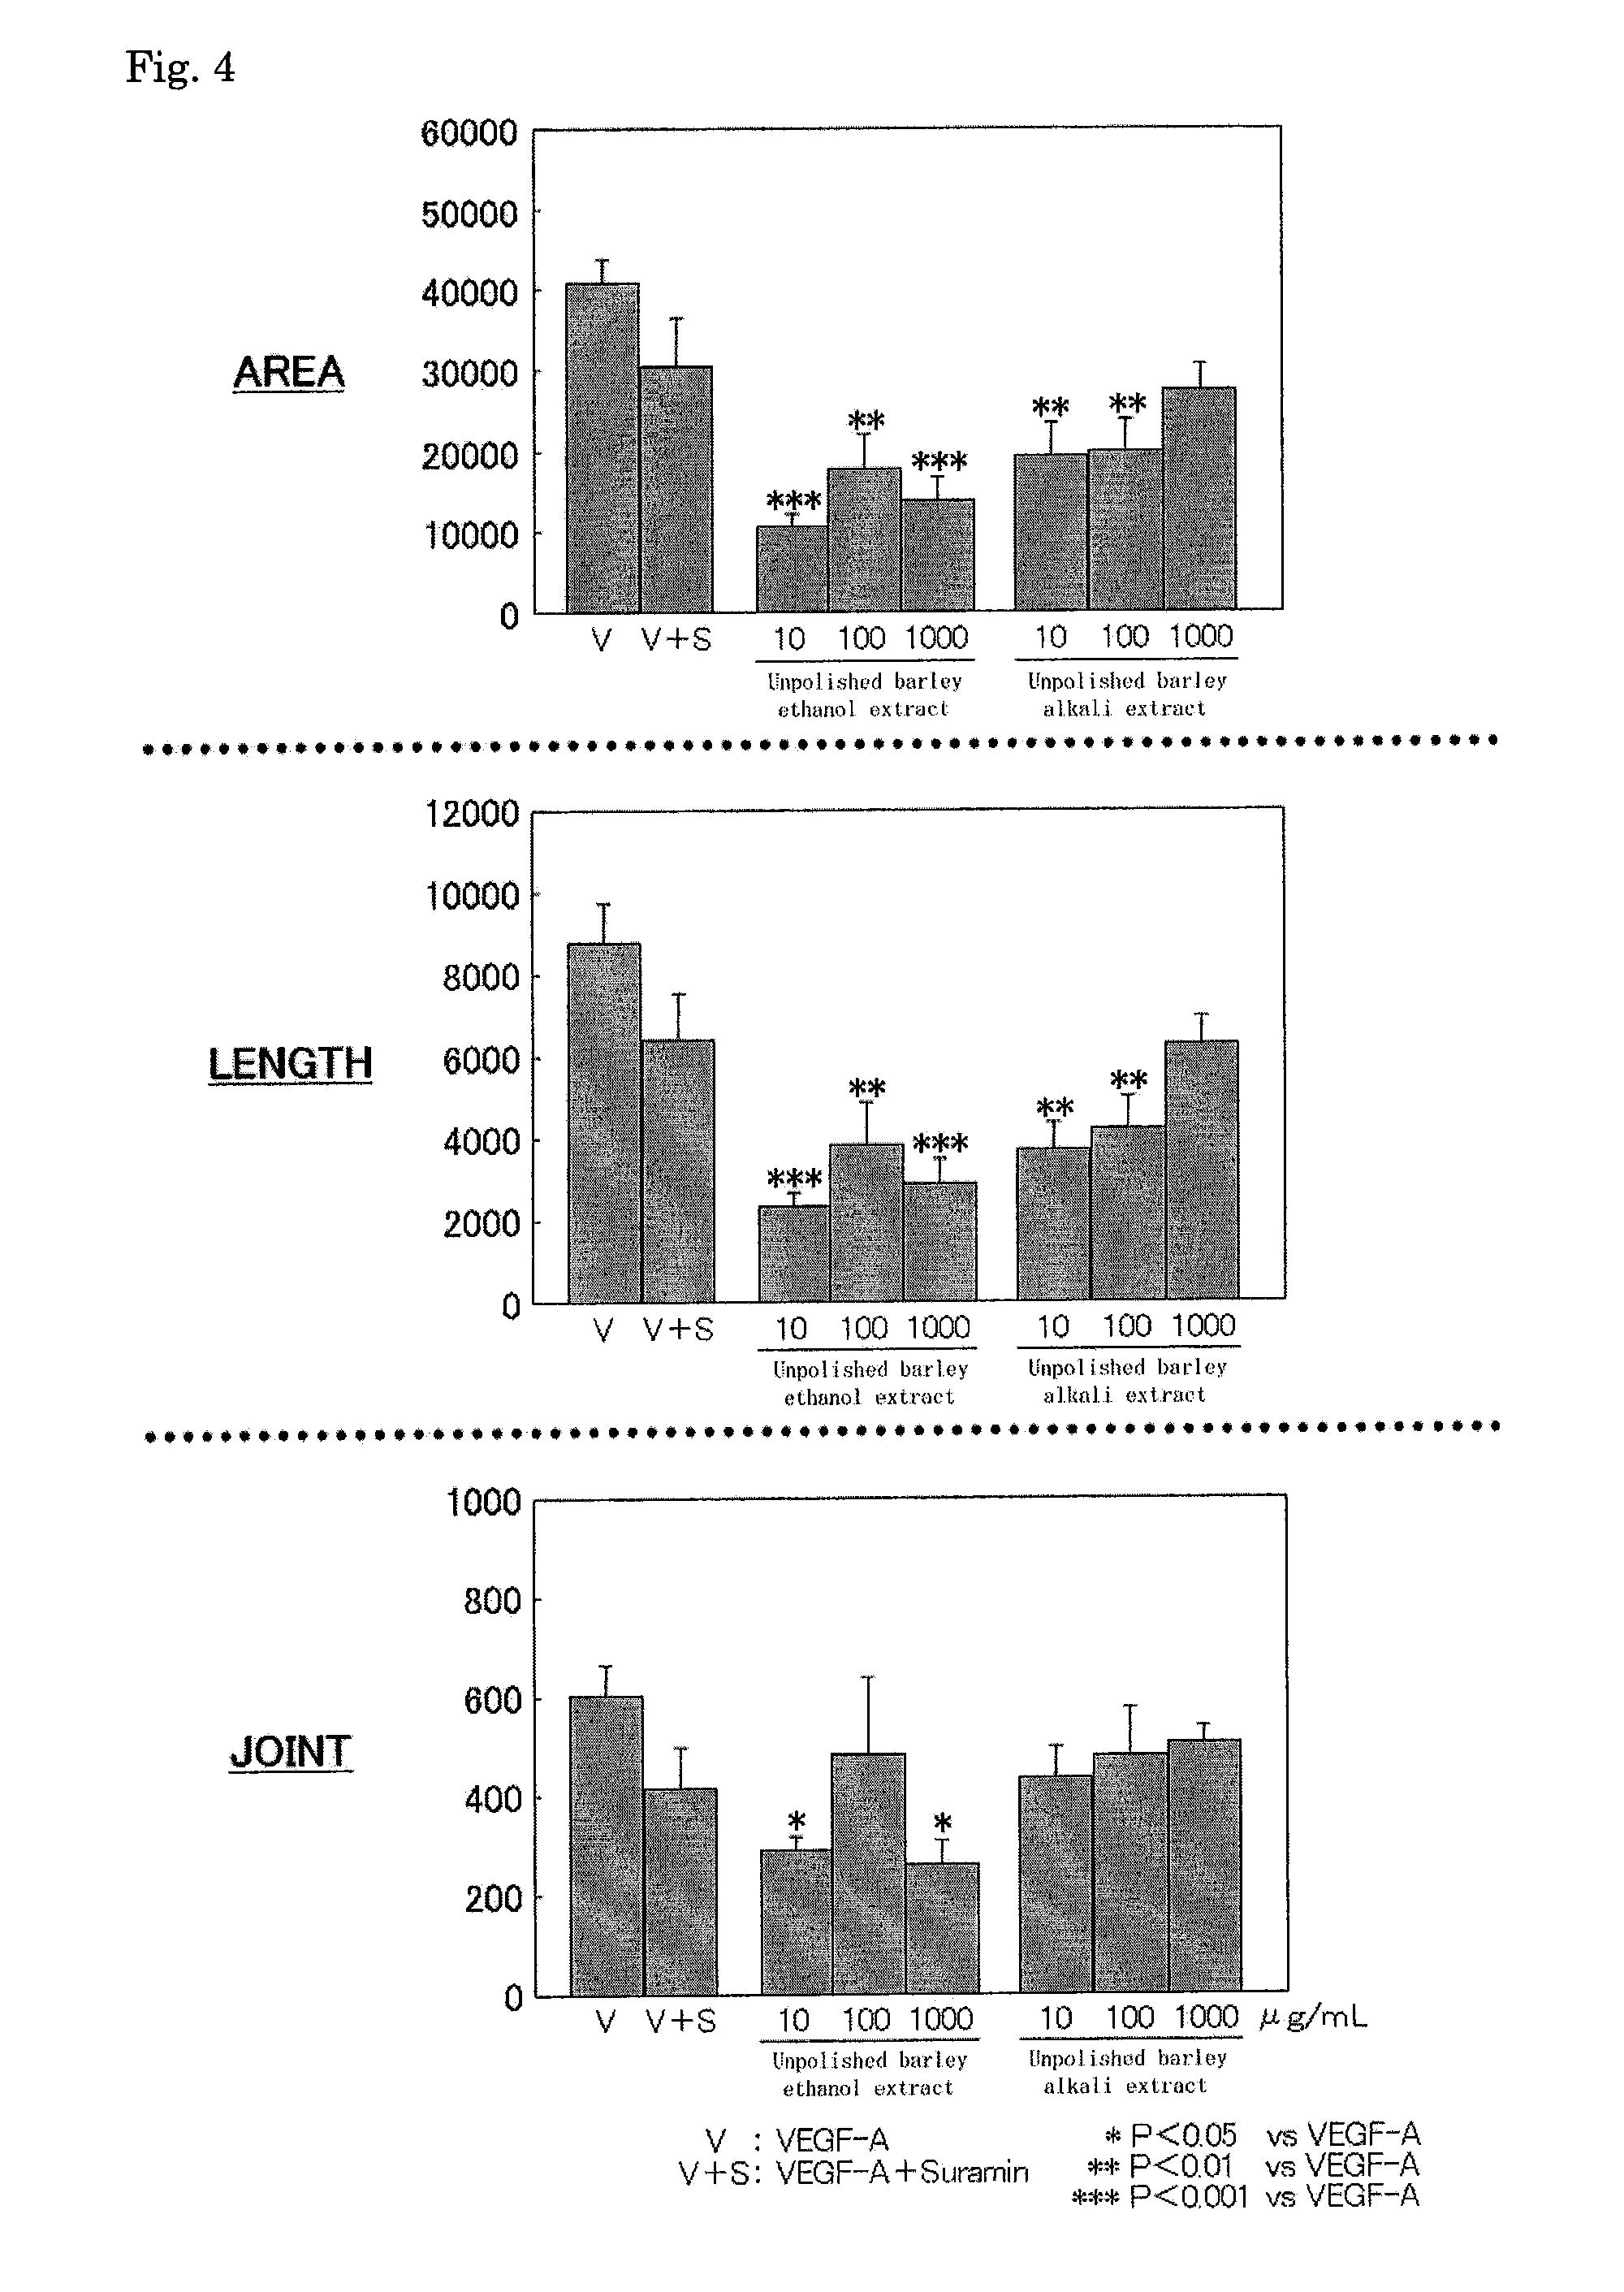 Anti-angiogenic composition comprising grain-derived component as active ingredient